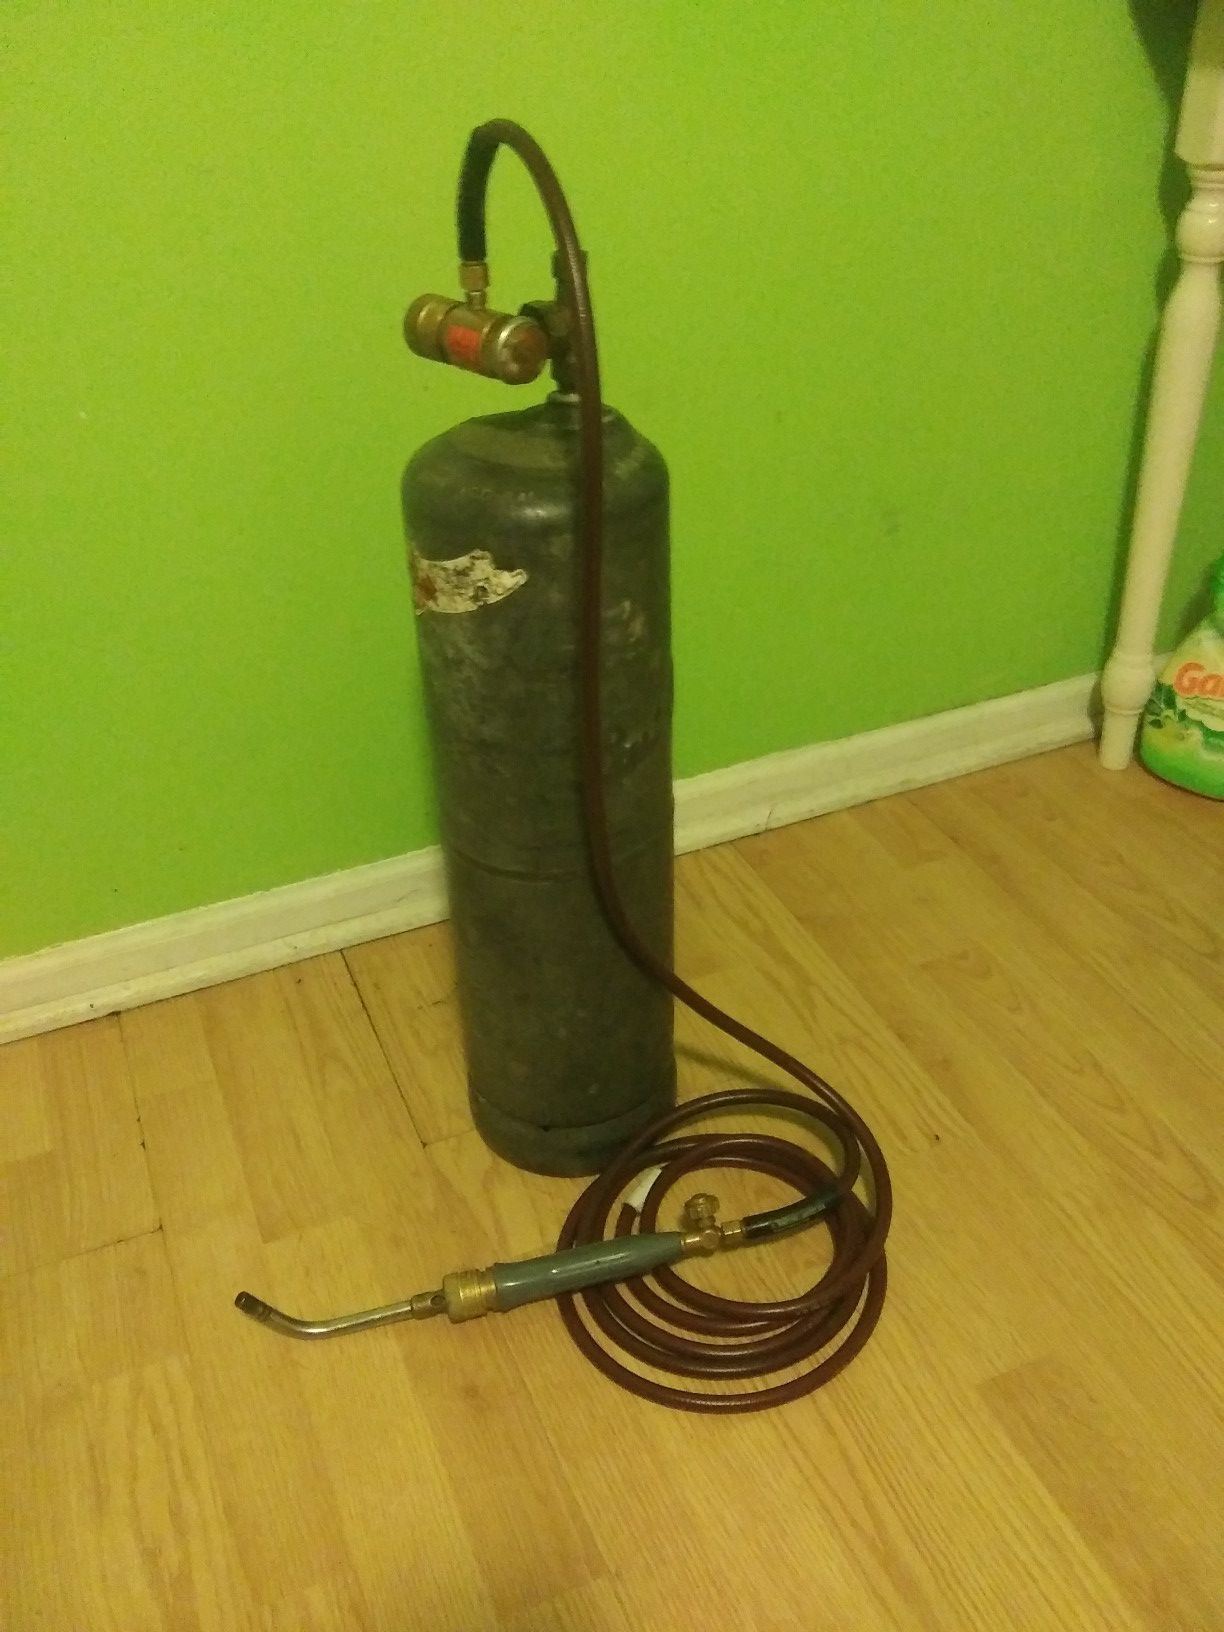 Turbo torch with full acetylene tank